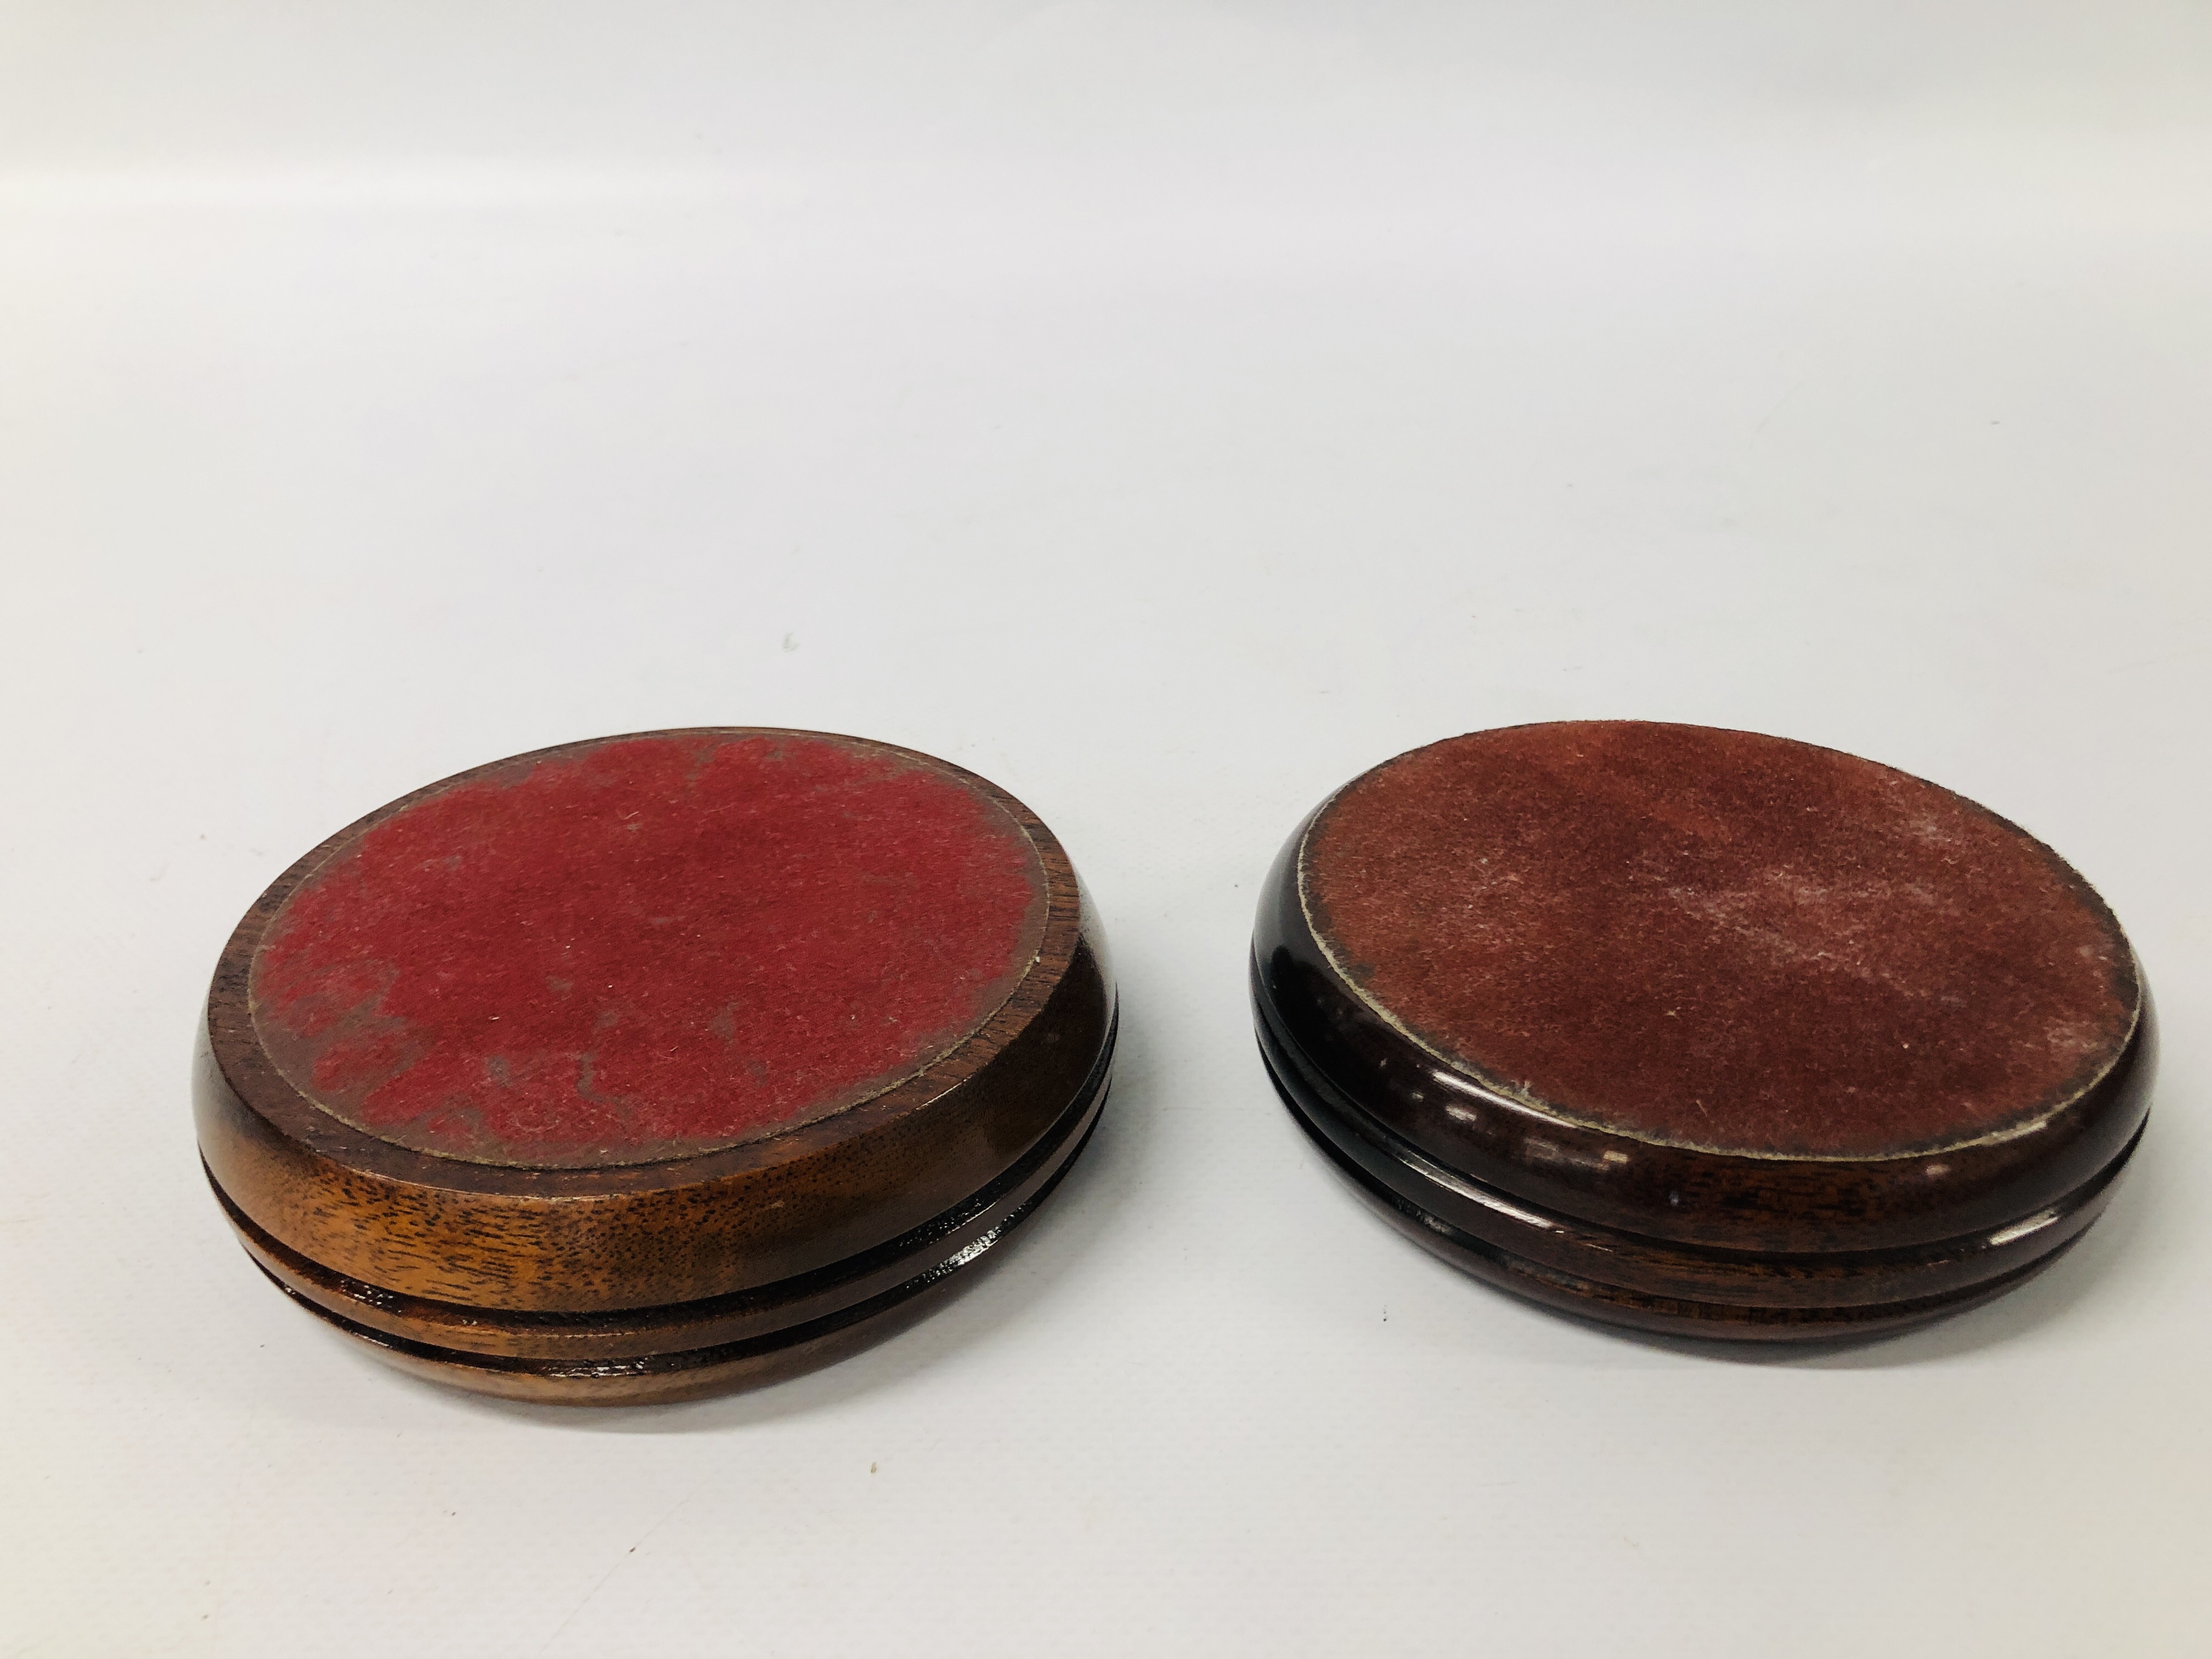 PAIR OF MAHOGANY WINE COASTERS WITH SILVER DISC INSERTS. - Image 7 of 7